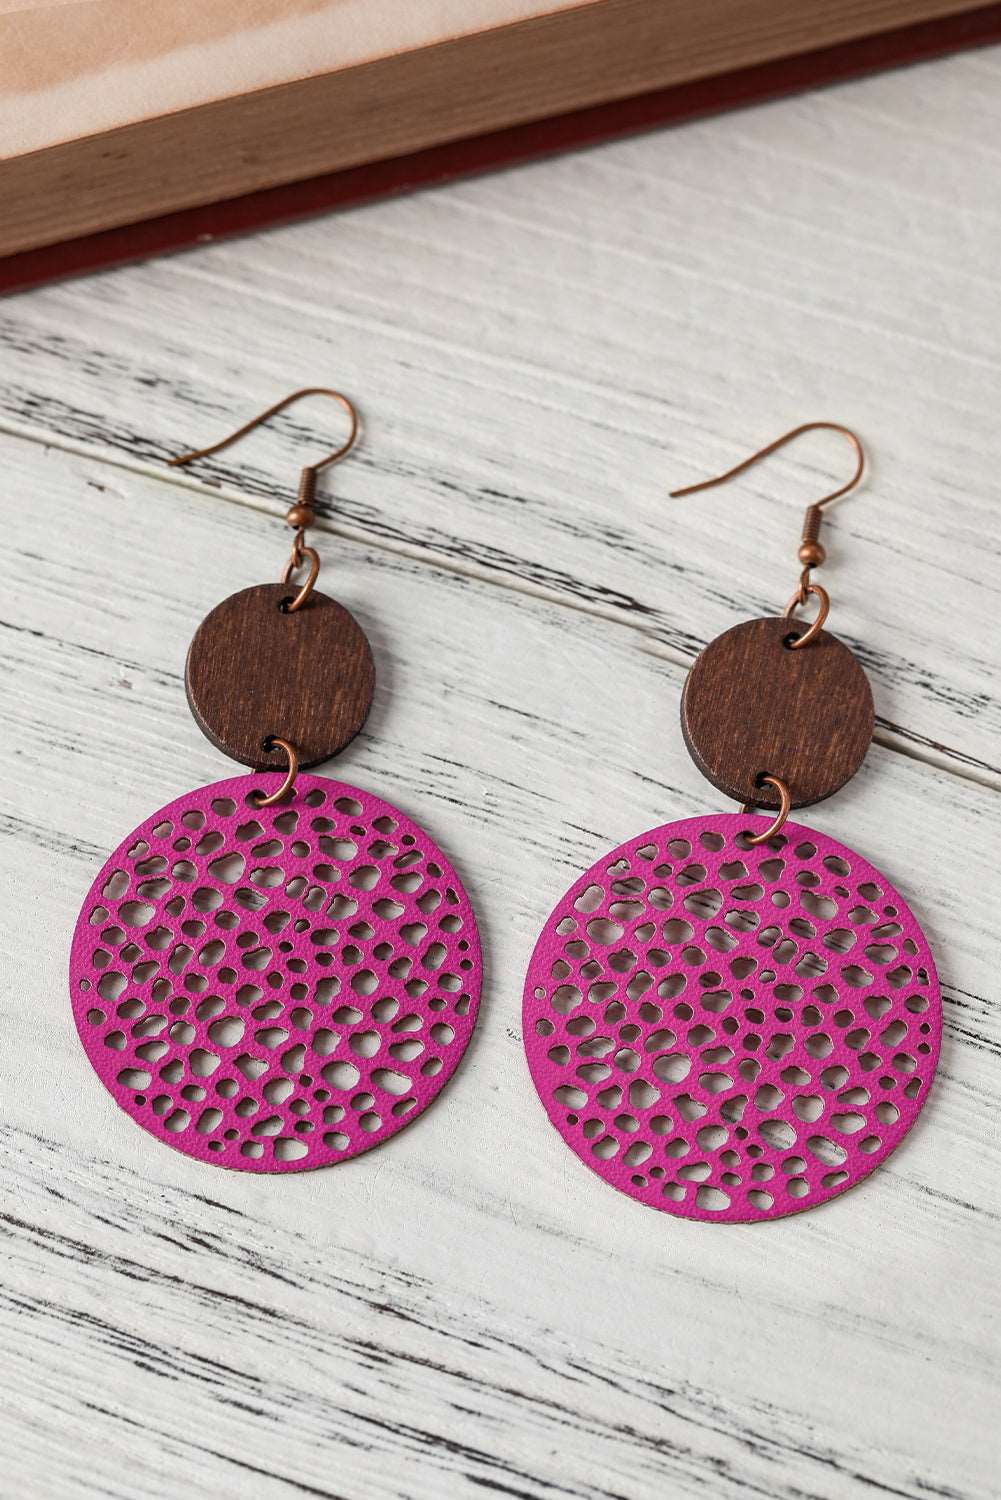 Beige Hollow Out Wooden Round Drop Earrings